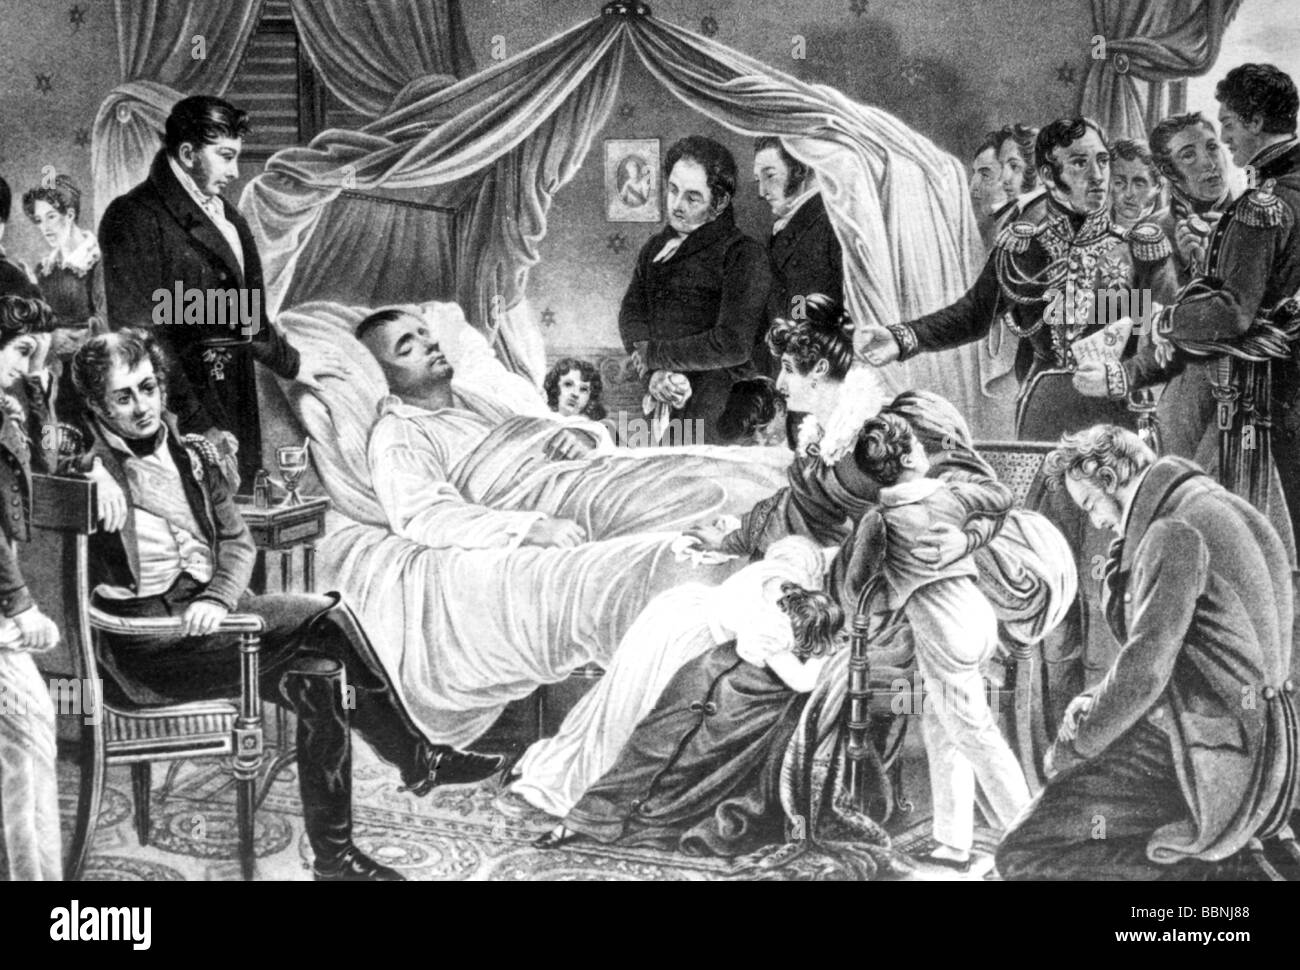 Napoleon I, 15.8.1769 - 5.5.1821, Emperor of the French 1804 - 1815, death, on the deathbed, St. Helena, drawing, Stock Photo